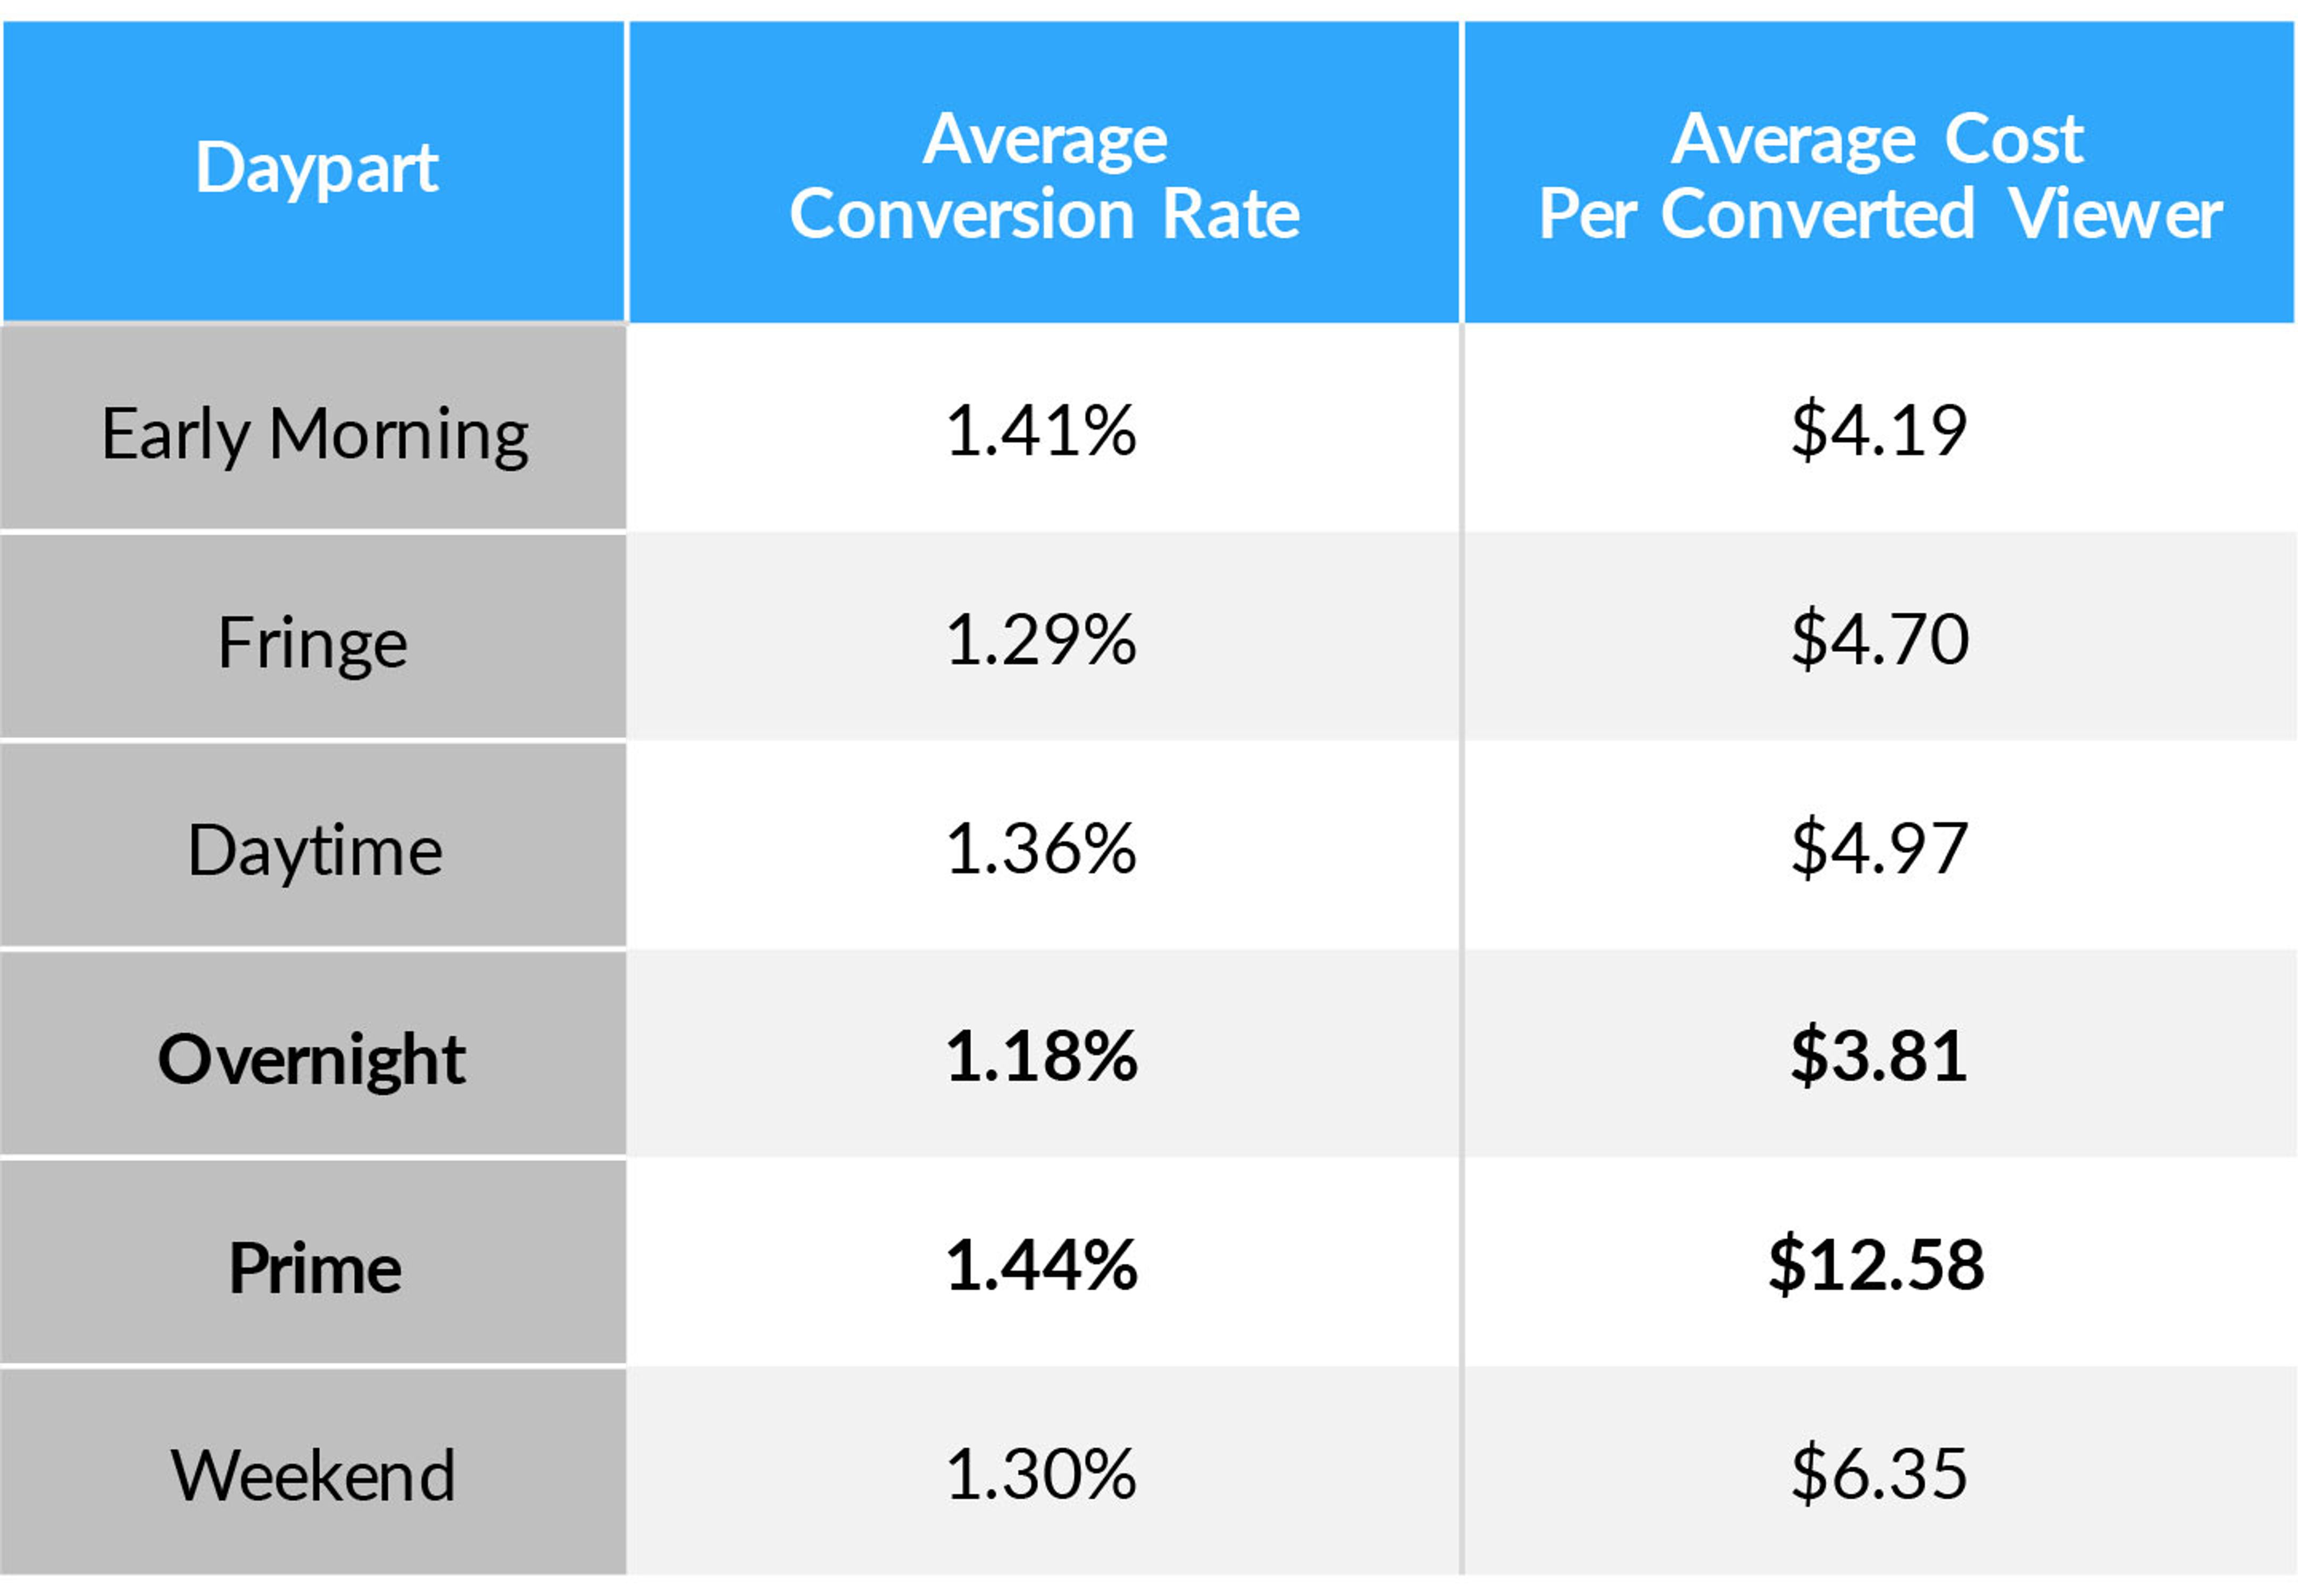 Conversion rate and cost per converted viewer analysis broken down by dayparts for TV advertising.